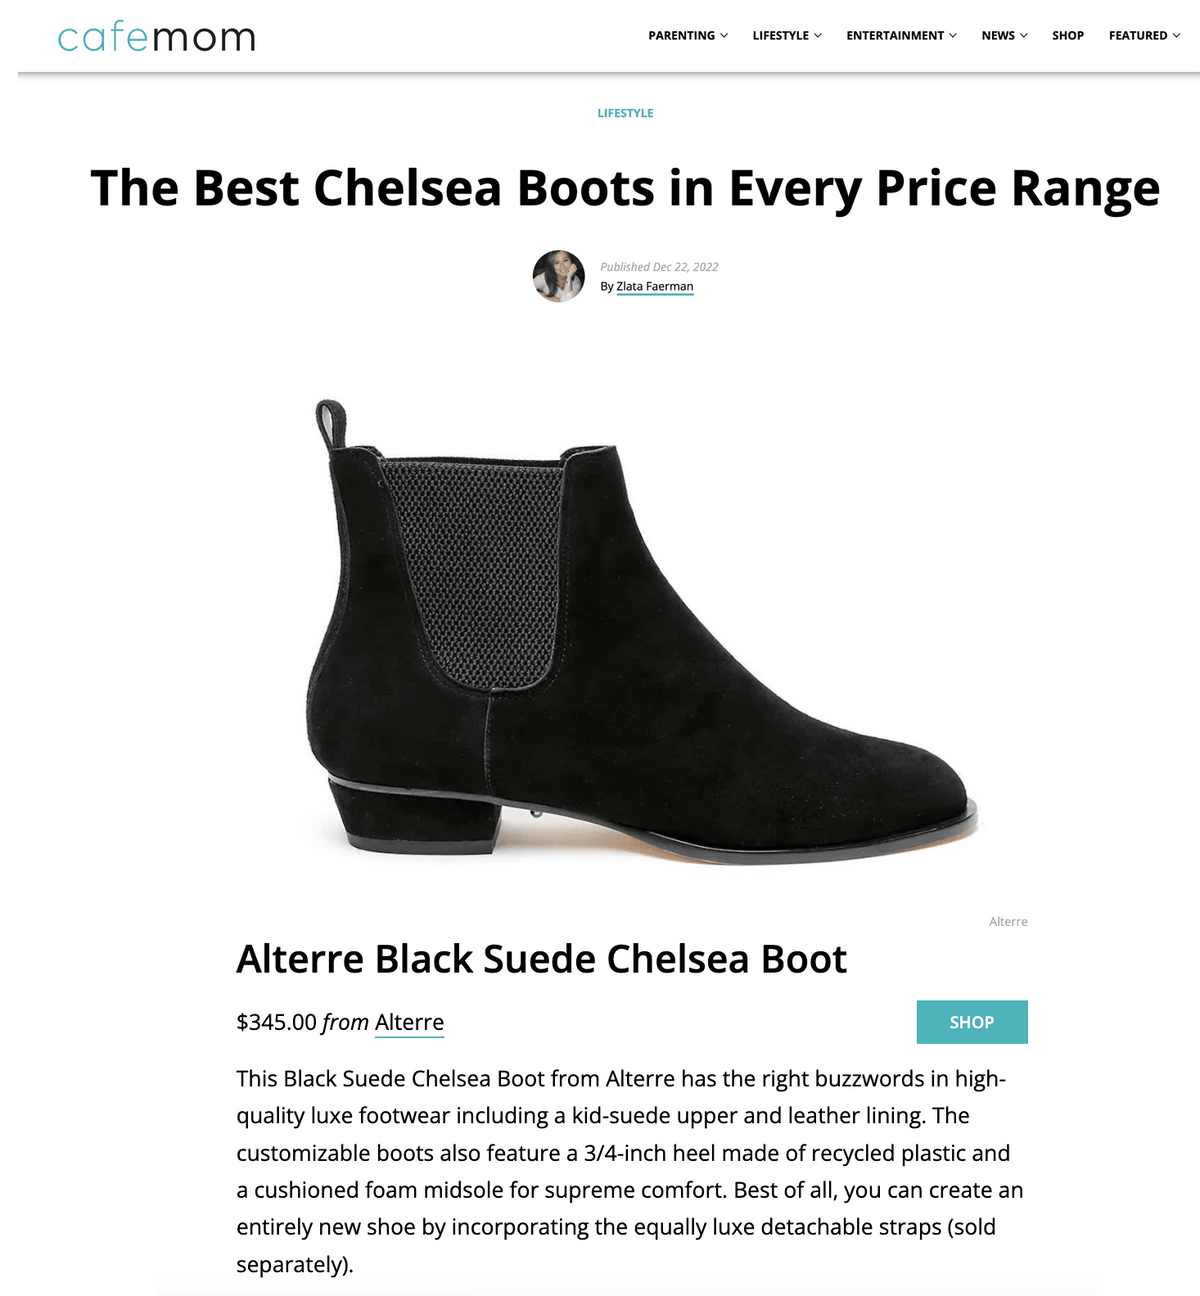 Alterre shoes featured on Cafe Mom - Customizable Black Suede Chelsea Boots